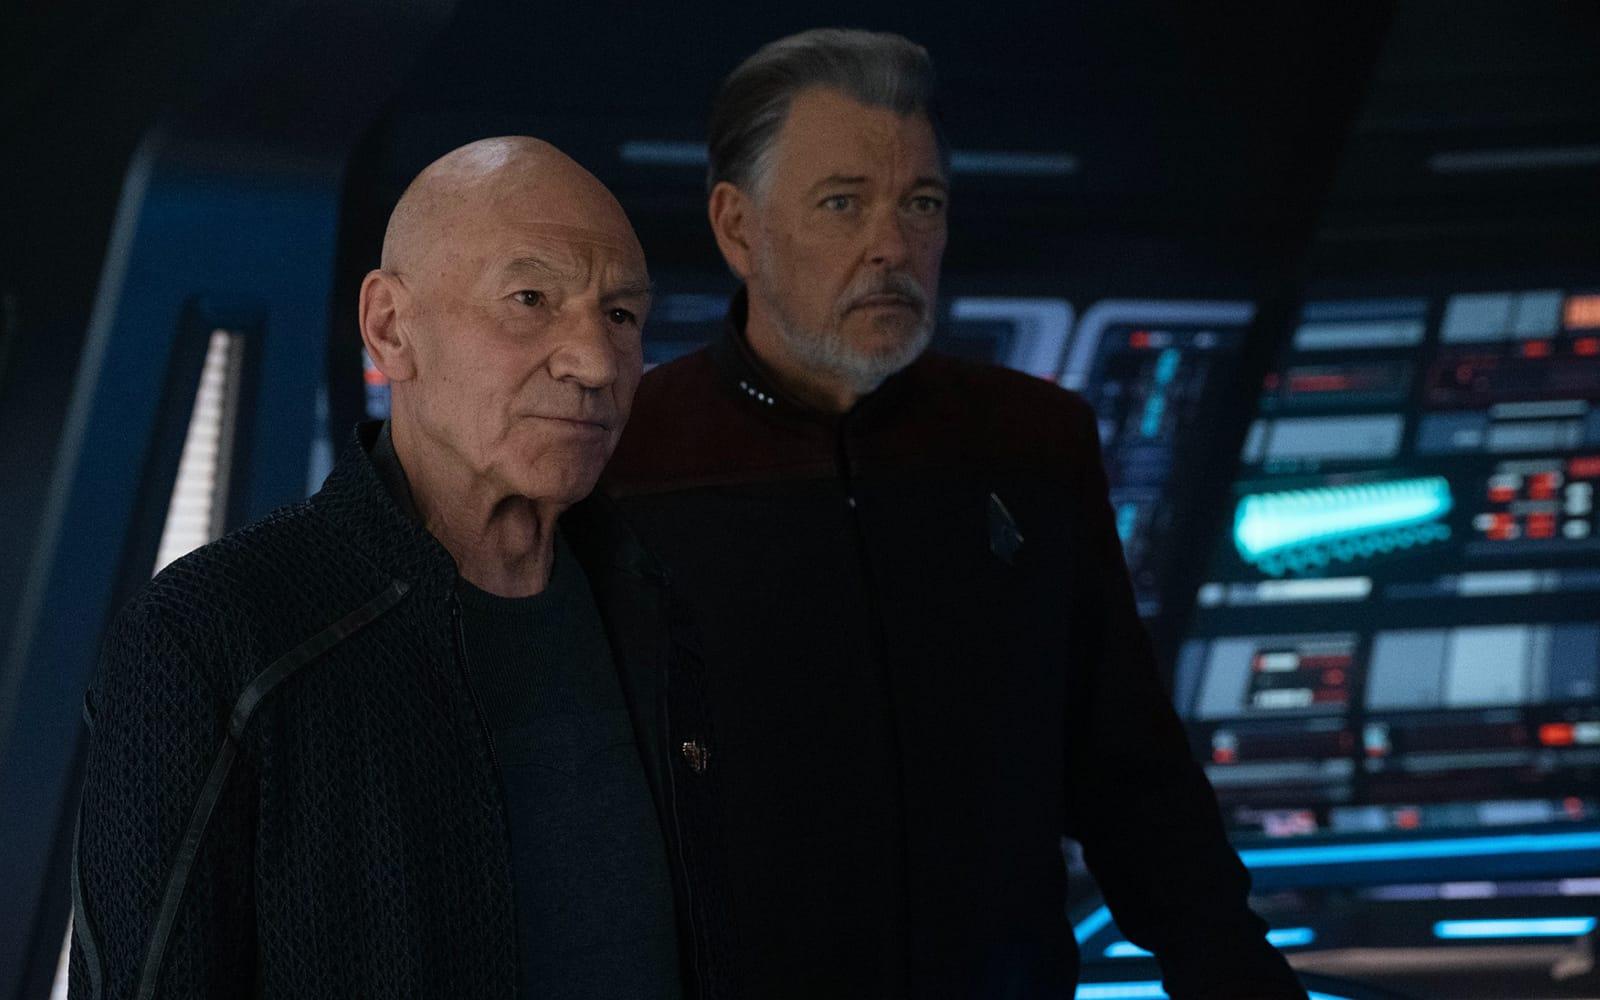 Jean-Luc Picard and William Riker on the bridge of USS Titan-A in Star Trek: Picard